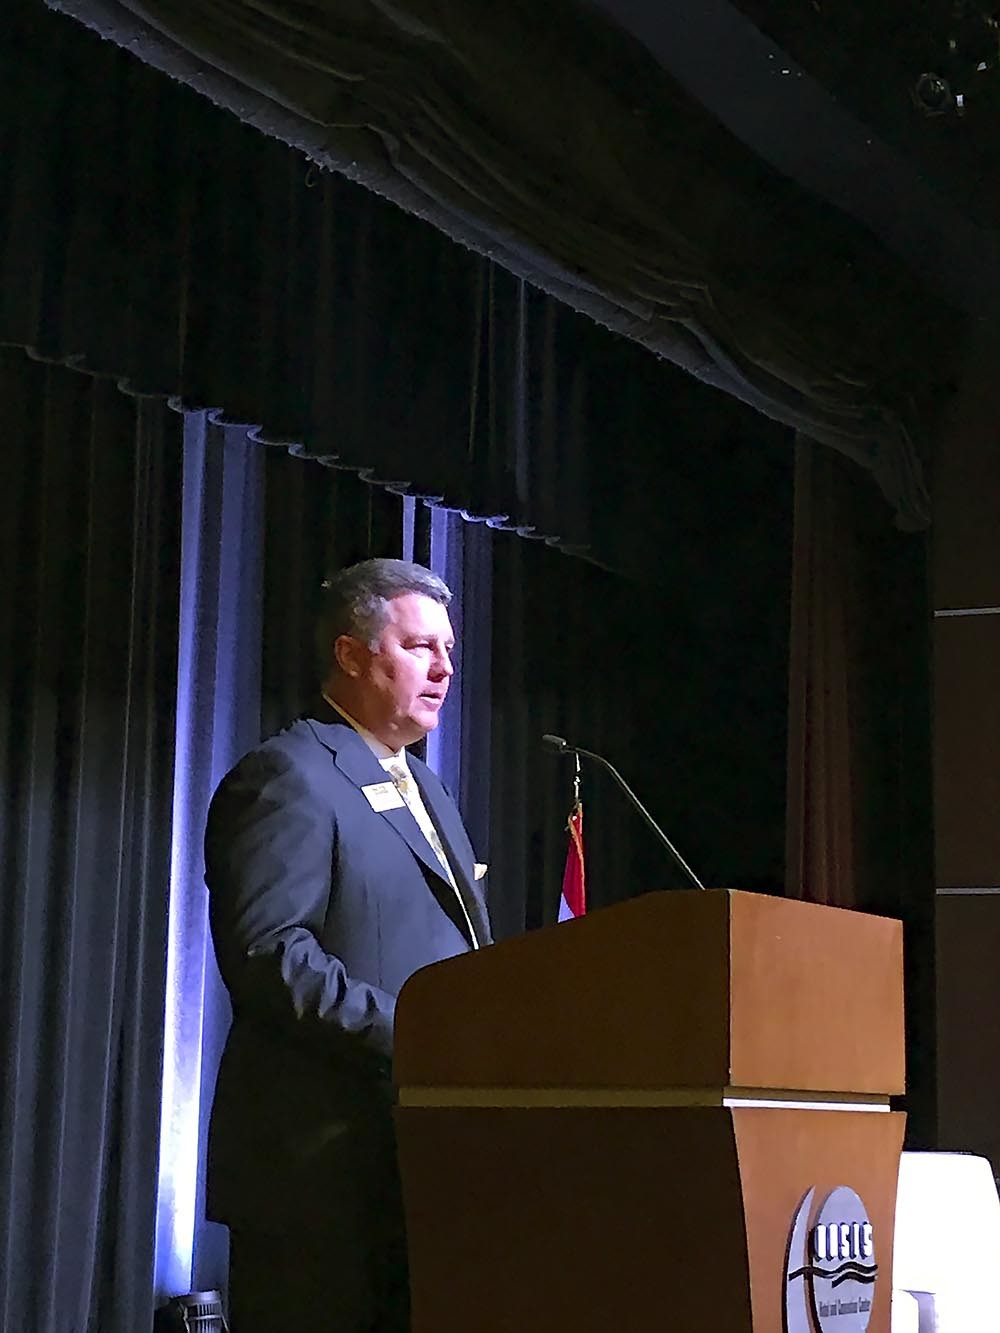 Roughly 450 people attended Springfield Area Chamber of Commerce’s annual Membership Luncheon on Aug. 9 at Oasis Hotel & Convention Center. Above, Chairman John Wanamaker welcomes the sold-out crowd.